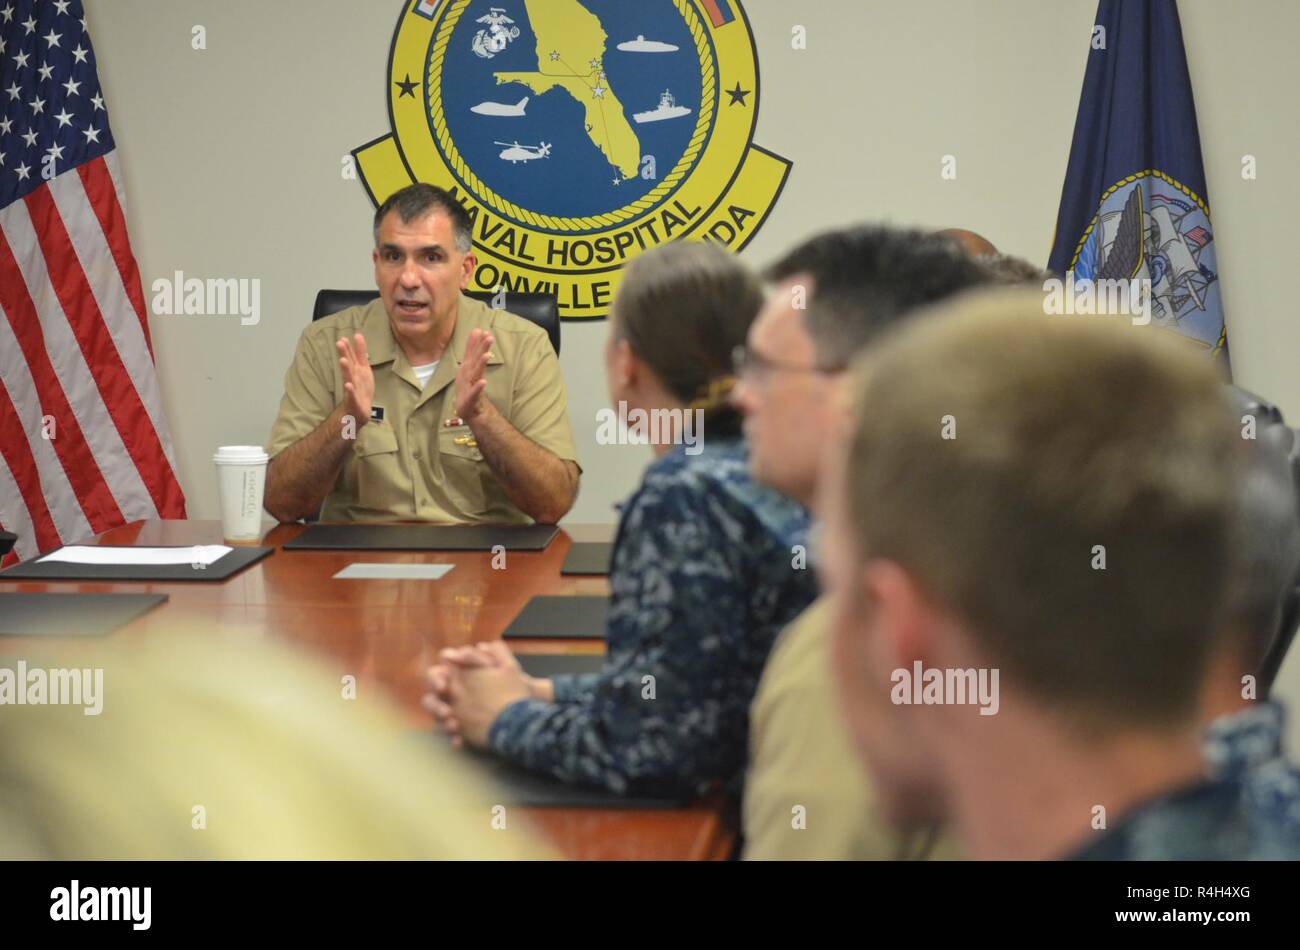 JACKSONVILLE, Fla. (Sept. 27, 2018) Capt. Matthew Case, Naval Hospital Jacksonville commanding officer, speaks at a pre-deployment briefing at the hospital. Twenty five U.S. military medicine personnel from the hospital and its five branch health clinics will deploy this fall with the hospital ship USNS Comfort (T-AH 20) to Central and South America. Stock Photo